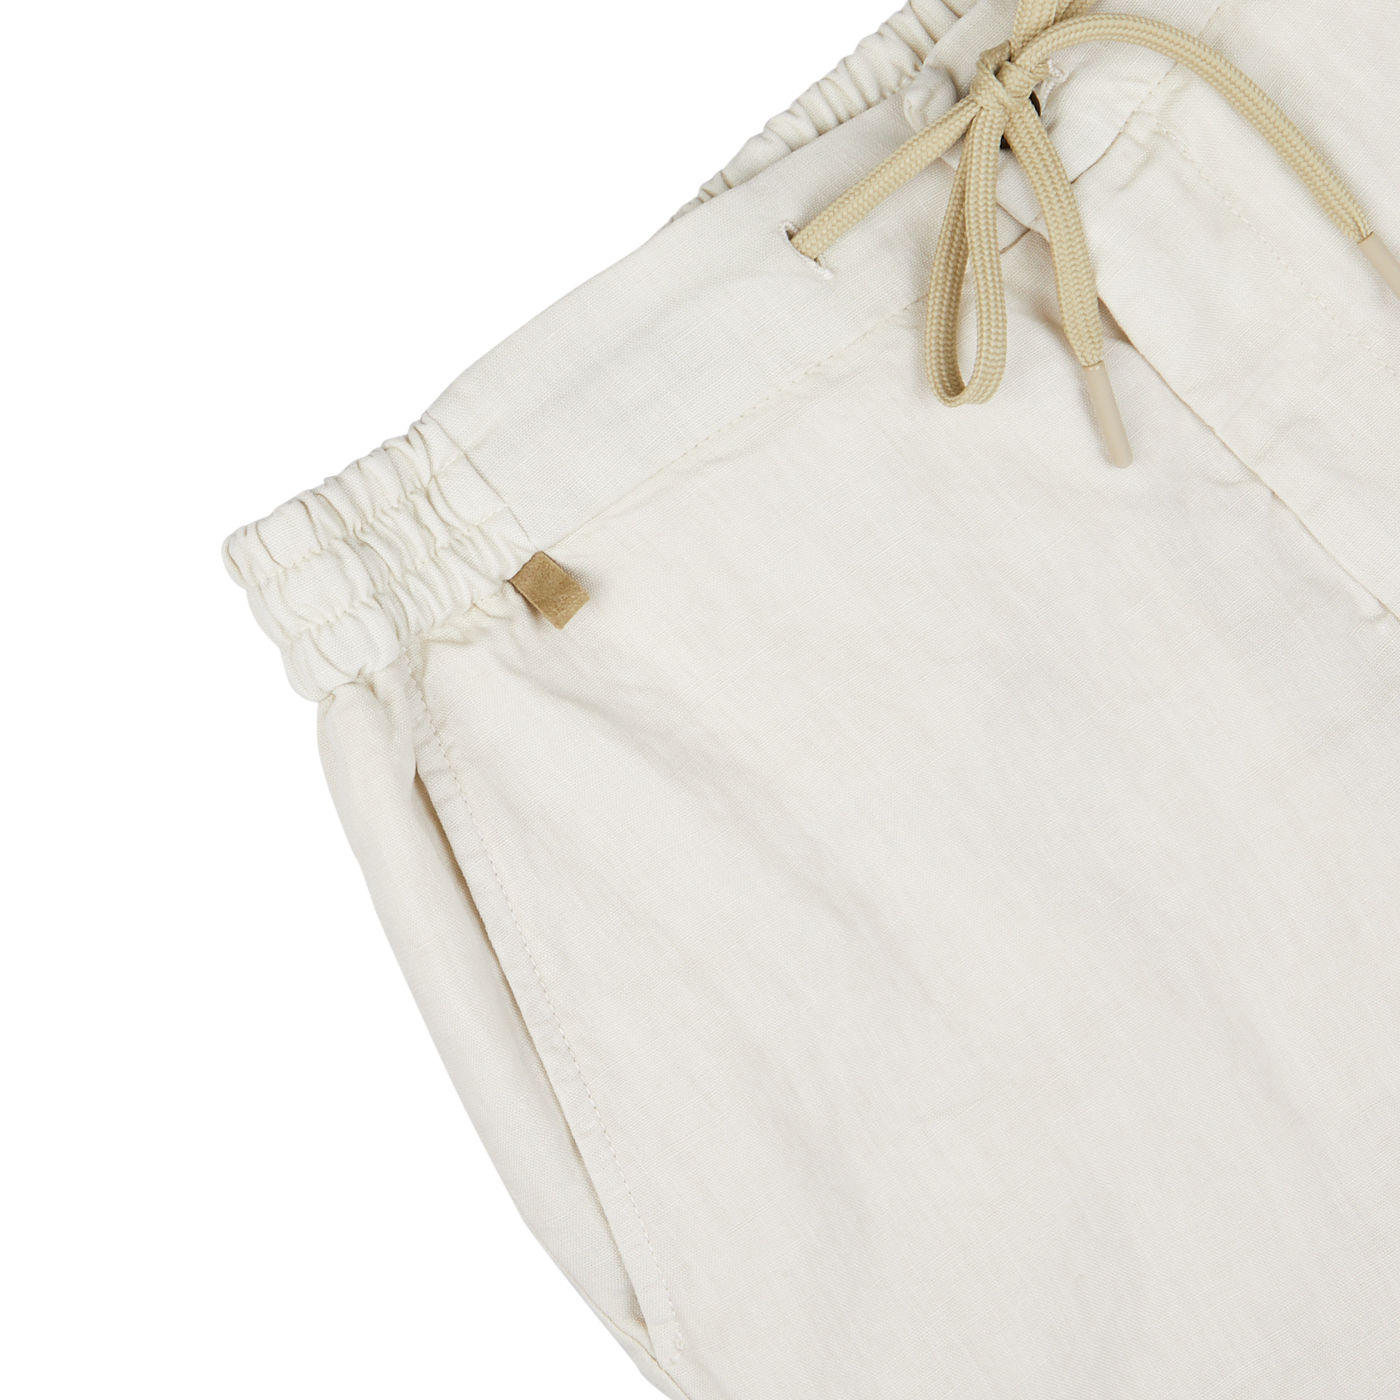 Close-up of a Berwich cream beige washed linen drawstring shorts' waistband with a metal brand tag.